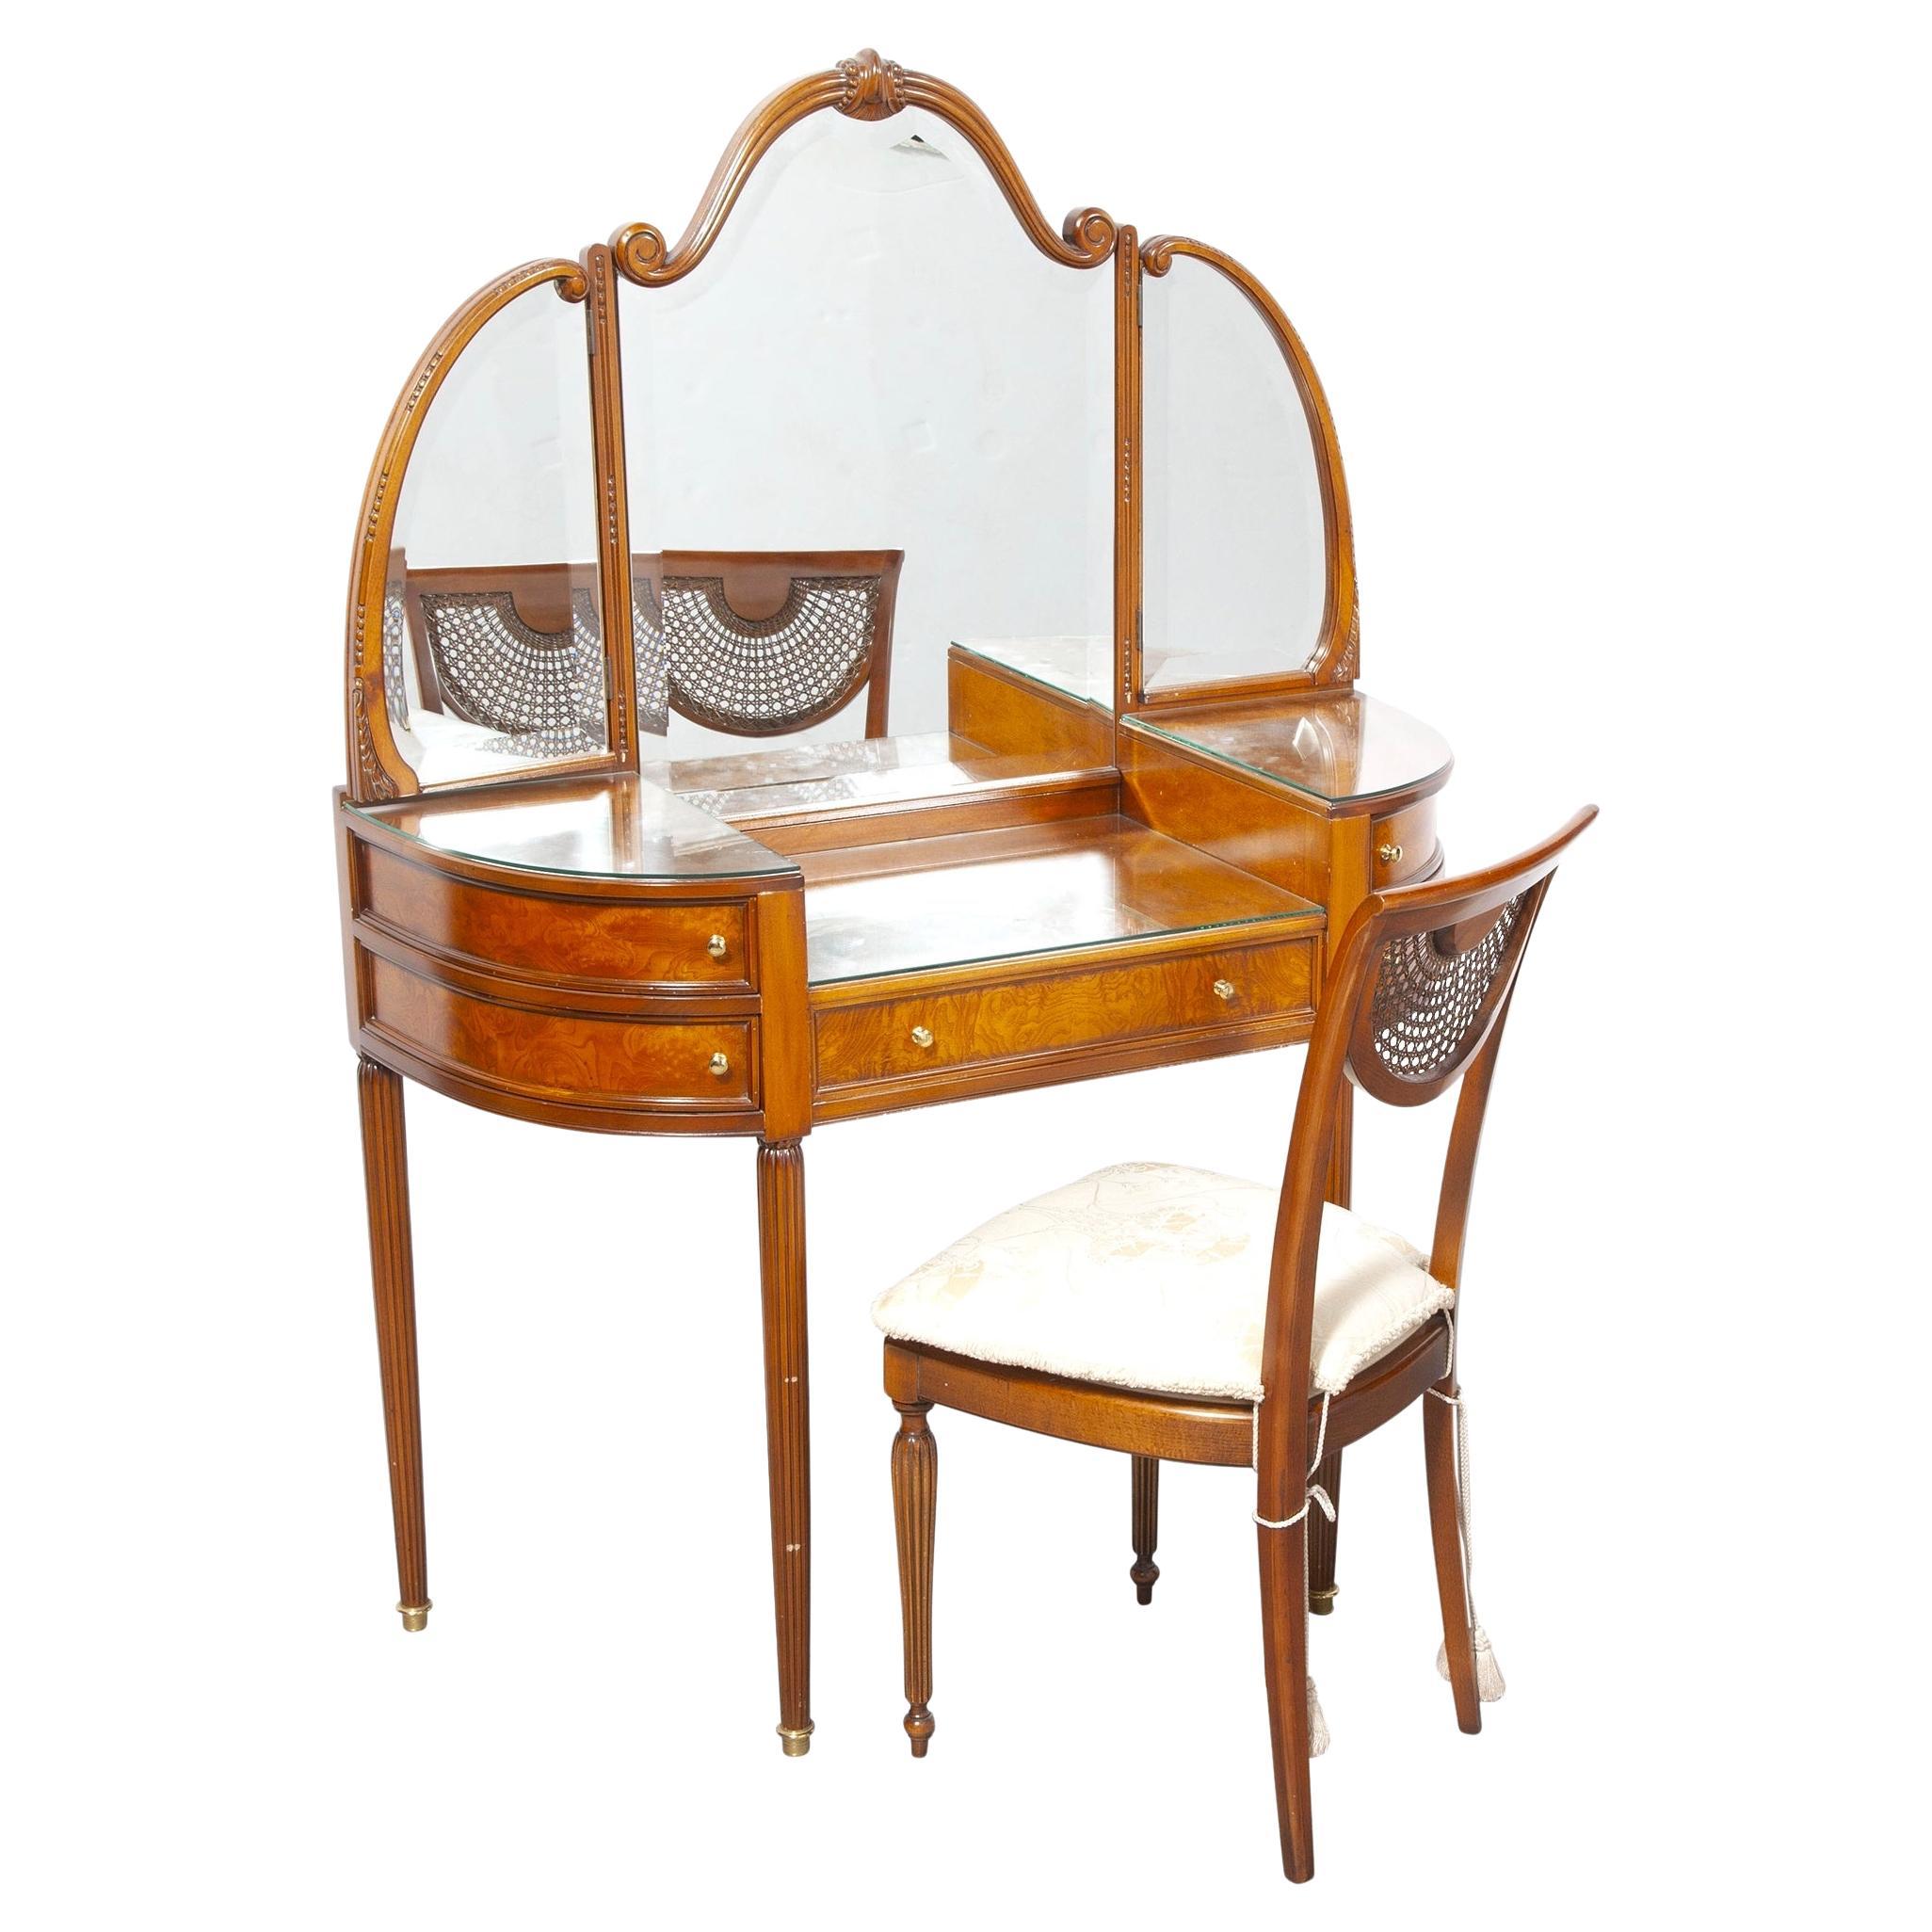 Italian Edwardian Style Walnut Vanity Dressing Table With Chair For Sale